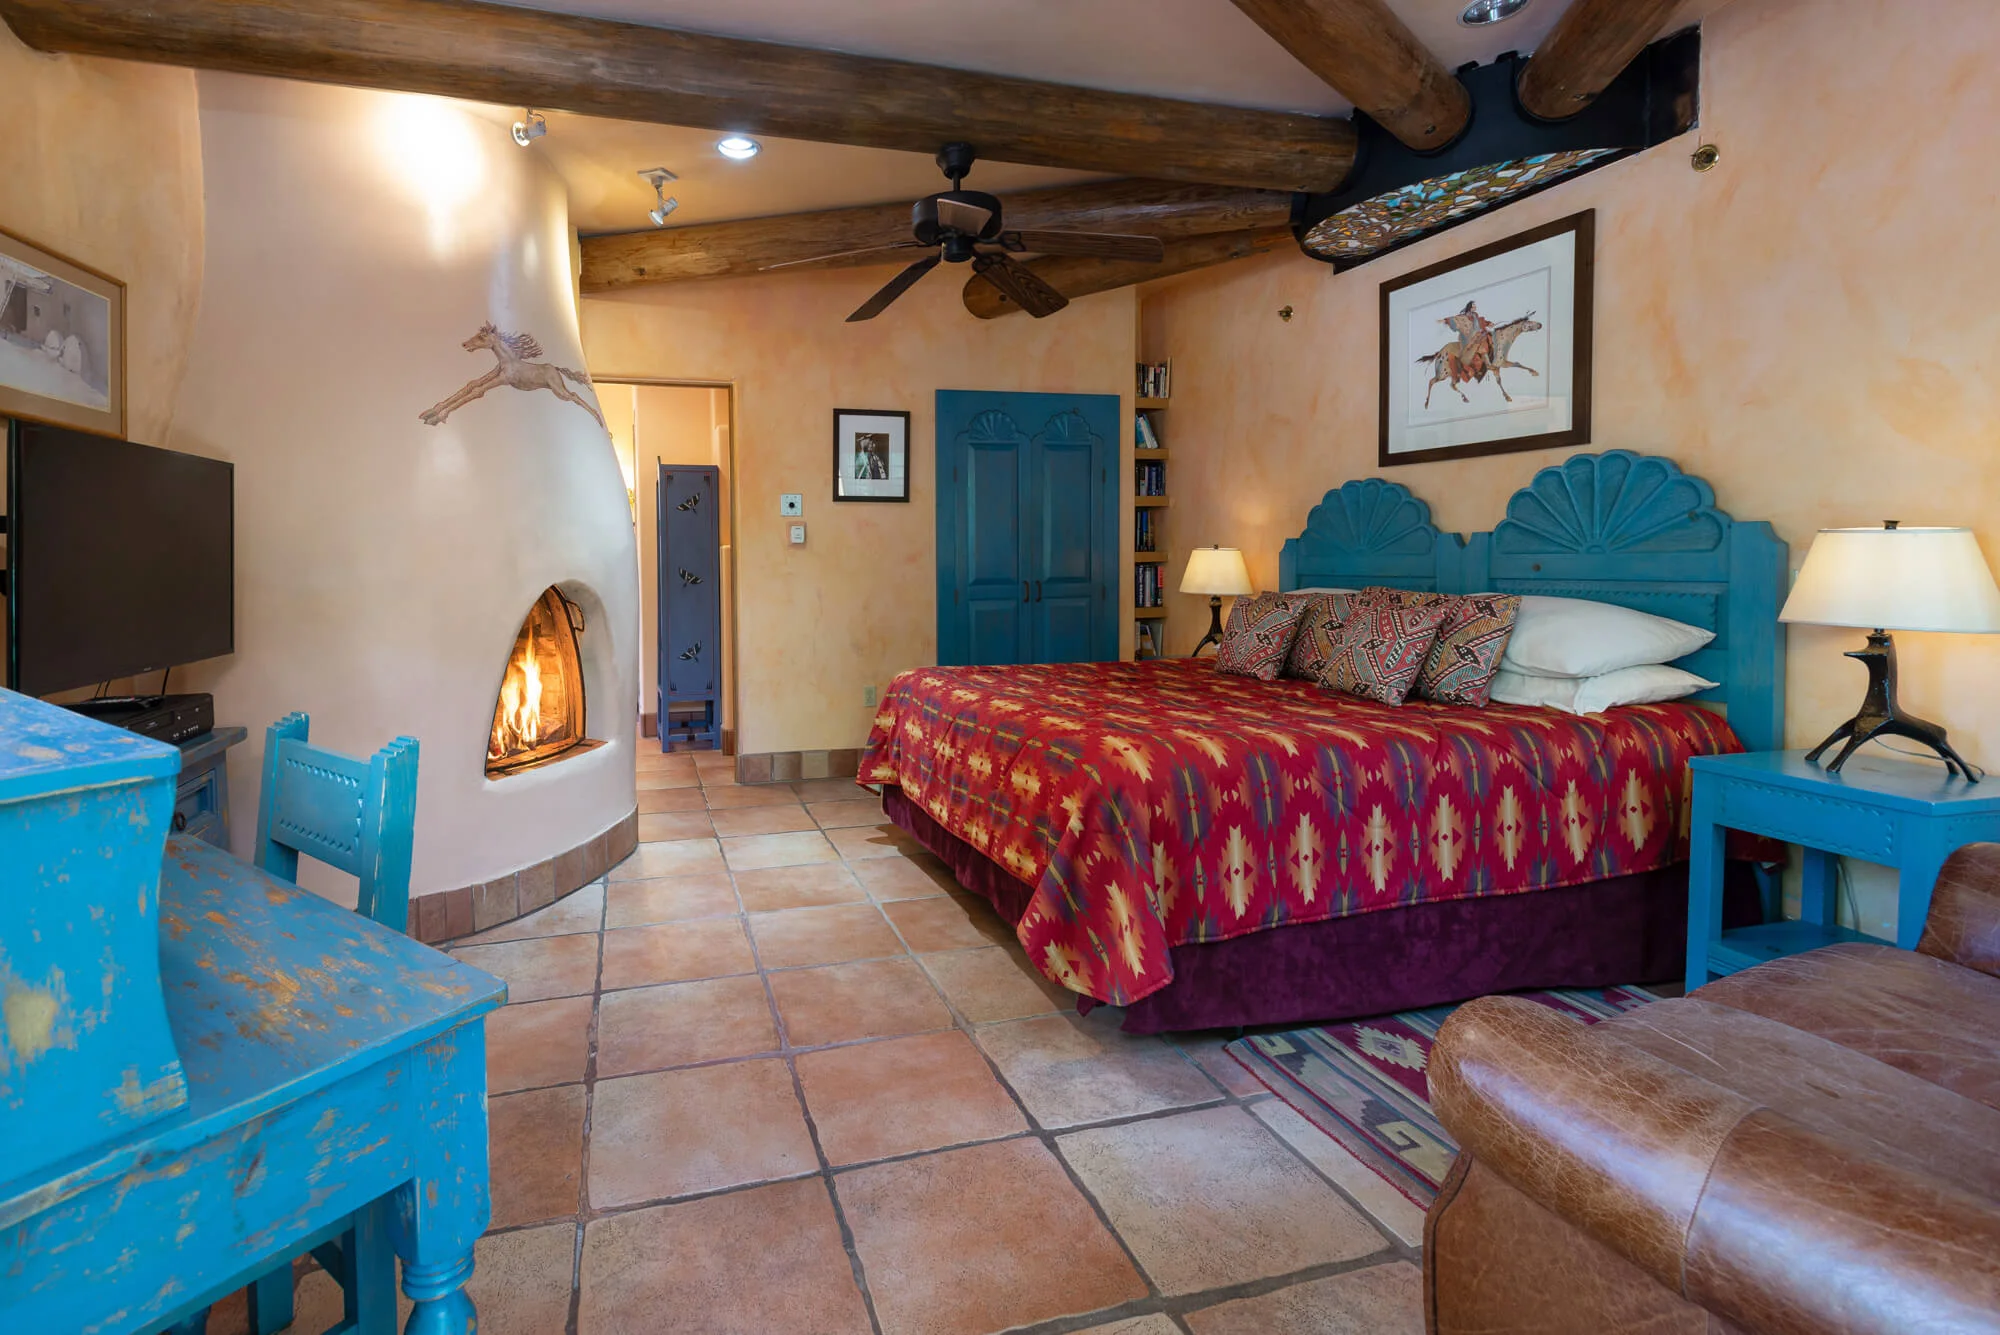 Taos Pubelo king room with kiva fireplace. Can also be set with two twin beds.